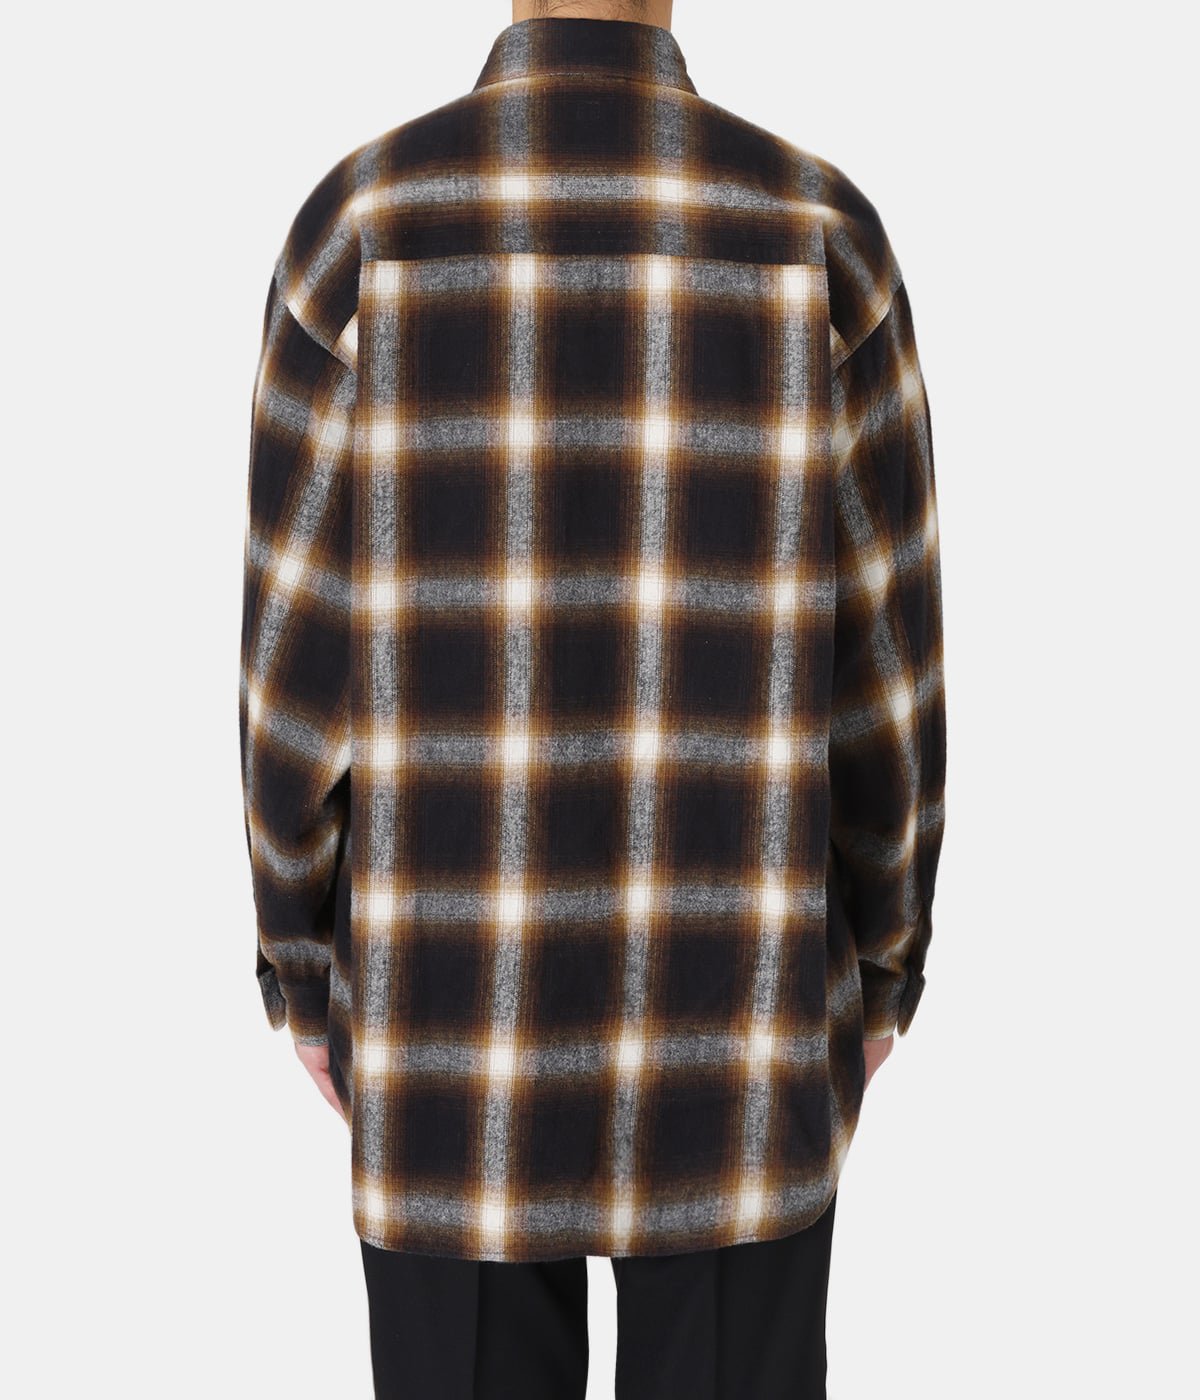 Ombre Check Flannel Shirts | Ets.MATERIAUX(マテリオ) / トップス 長袖シャツ (メンズ)の通販